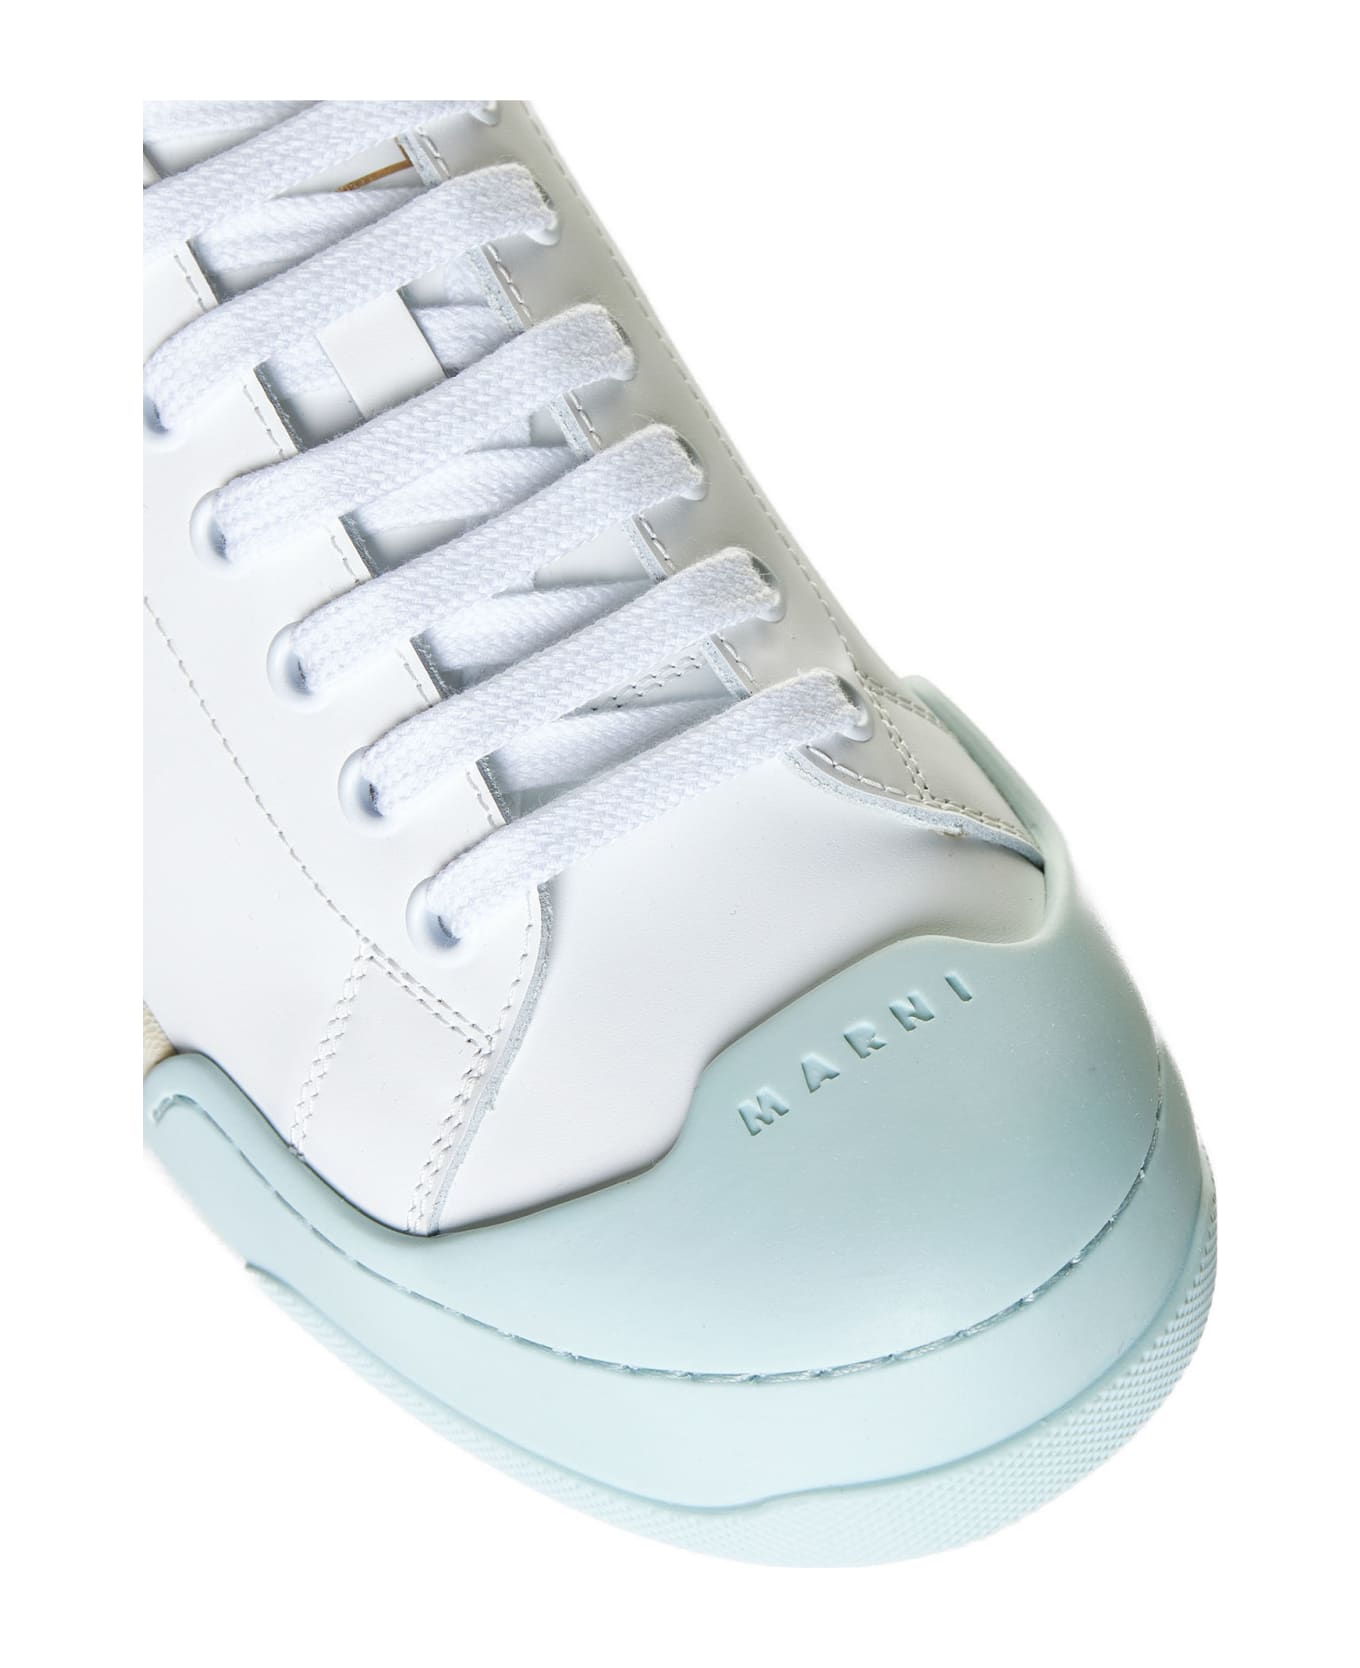 Marni Sneakers - Lily white/mineral ice